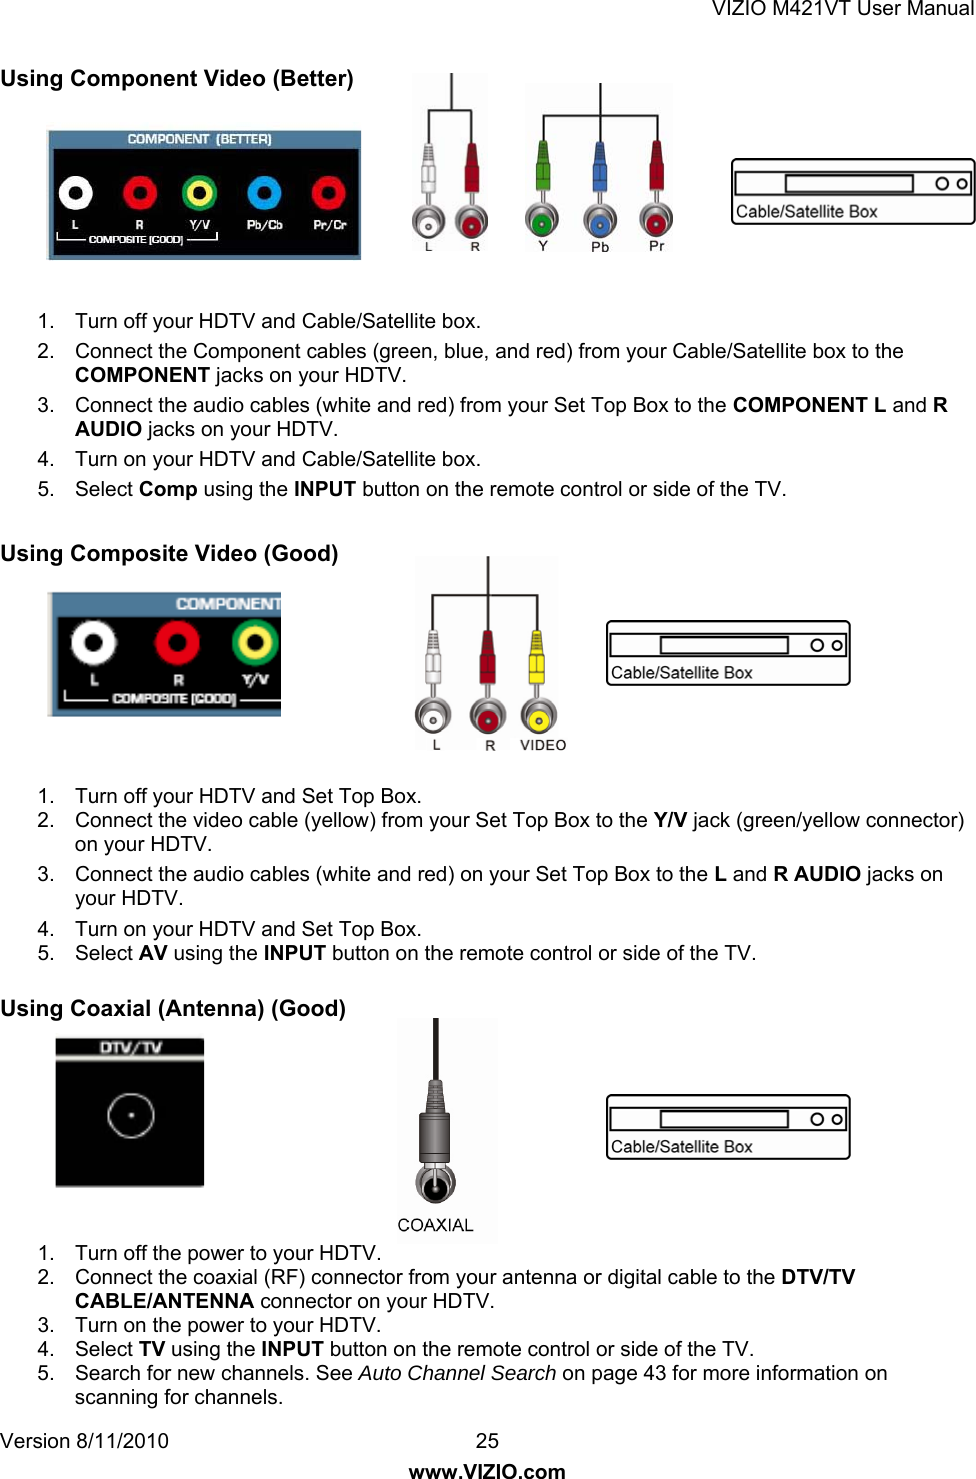 VIZIO M421VT User Manual Version 8/11/2010  25   www.VIZIO.com Using Component Video (Better)        1.  Turn off your HDTV and Cable/Satellite box. 2.  Connect the Component cables (green, blue, and red) from your Cable/Satellite box to the COMPONENT jacks on your HDTV. 3.  Connect the audio cables (white and red) from your Set Top Box to the COMPONENT L and R AUDIO jacks on your HDTV. 4.  Turn on your HDTV and Cable/Satellite box. 5. Select Comp using the INPUT button on the remote control or side of the TV.  Using Composite Video (Good)        1.  Turn off your HDTV and Set Top Box. 2.  Connect the video cable (yellow) from your Set Top Box to the Y/V jack (green/yellow connector) on your HDTV. 3.  Connect the audio cables (white and red) on your Set Top Box to the L and R AUDIO jacks on your HDTV. 4.  Turn on your HDTV and Set Top Box. 5. Select AV using the INPUT button on the remote control or side of the TV.  Using Coaxial (Antenna) (Good)        1.  Turn off the power to your HDTV. 2.  Connect the coaxial (RF) connector from your antenna or digital cable to the DTV/TV CABLE/ANTENNA connector on your HDTV. 3.  Turn on the power to your HDTV. 4. Select TV using the INPUT button on the remote control or side of the TV. 5.  Search for new channels. See Auto Channel Search on page 43 for more information on scanning for channels. 